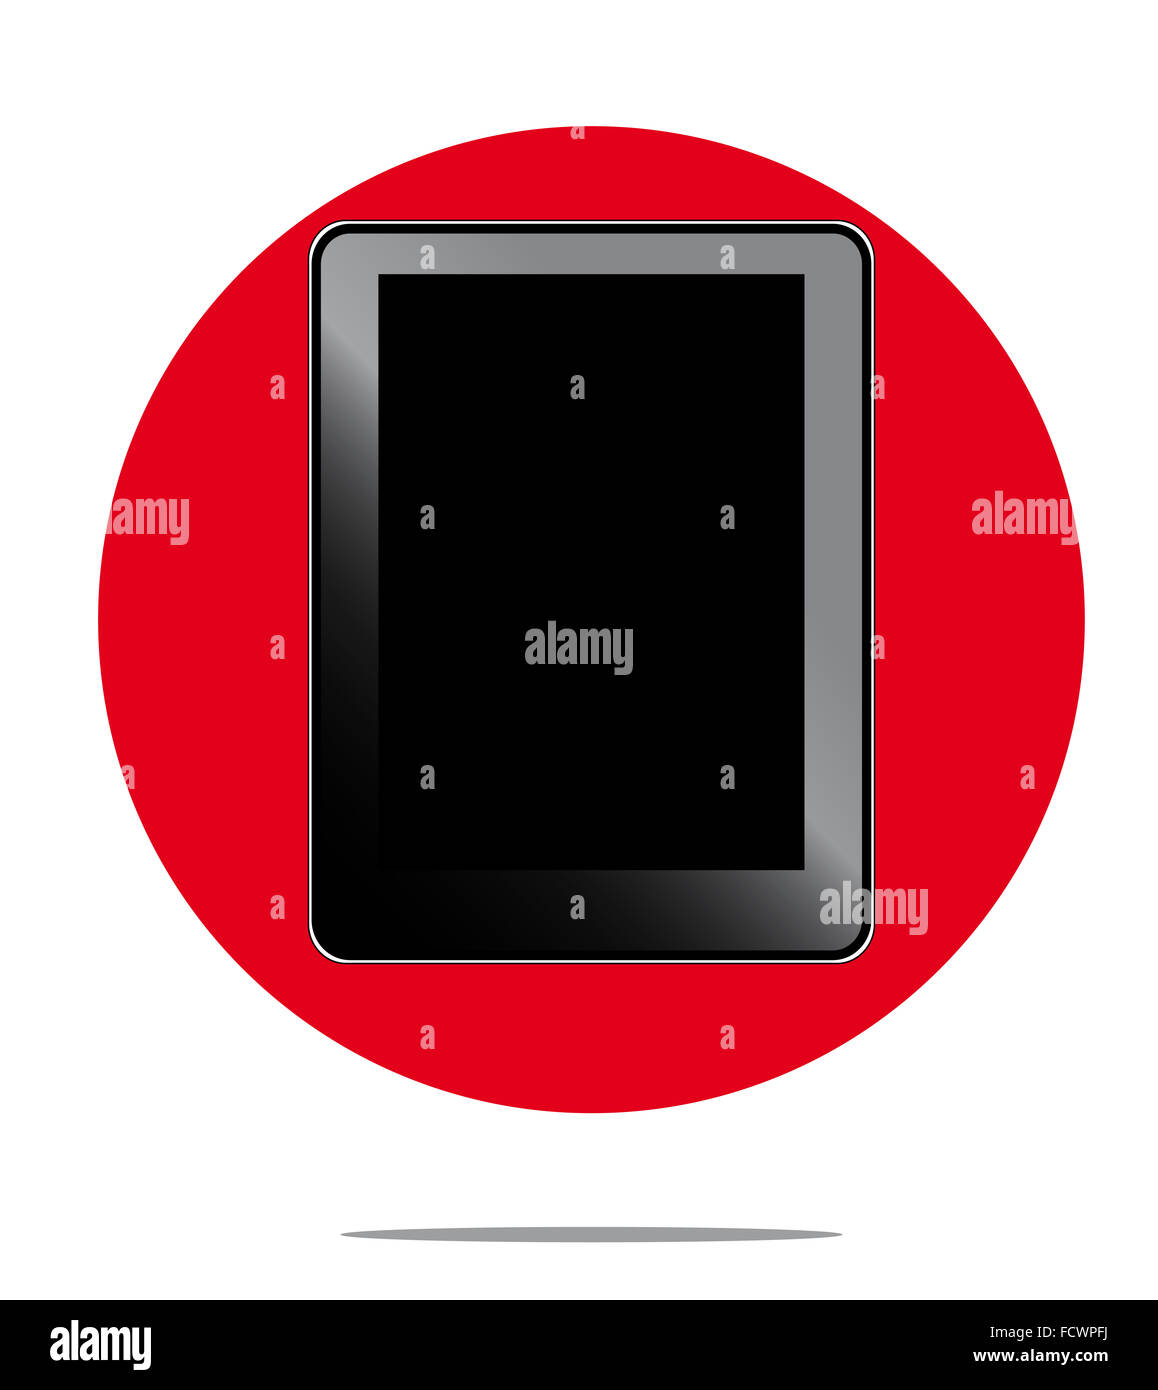 Illustration of black computer tablet with red circle background Stock Photo